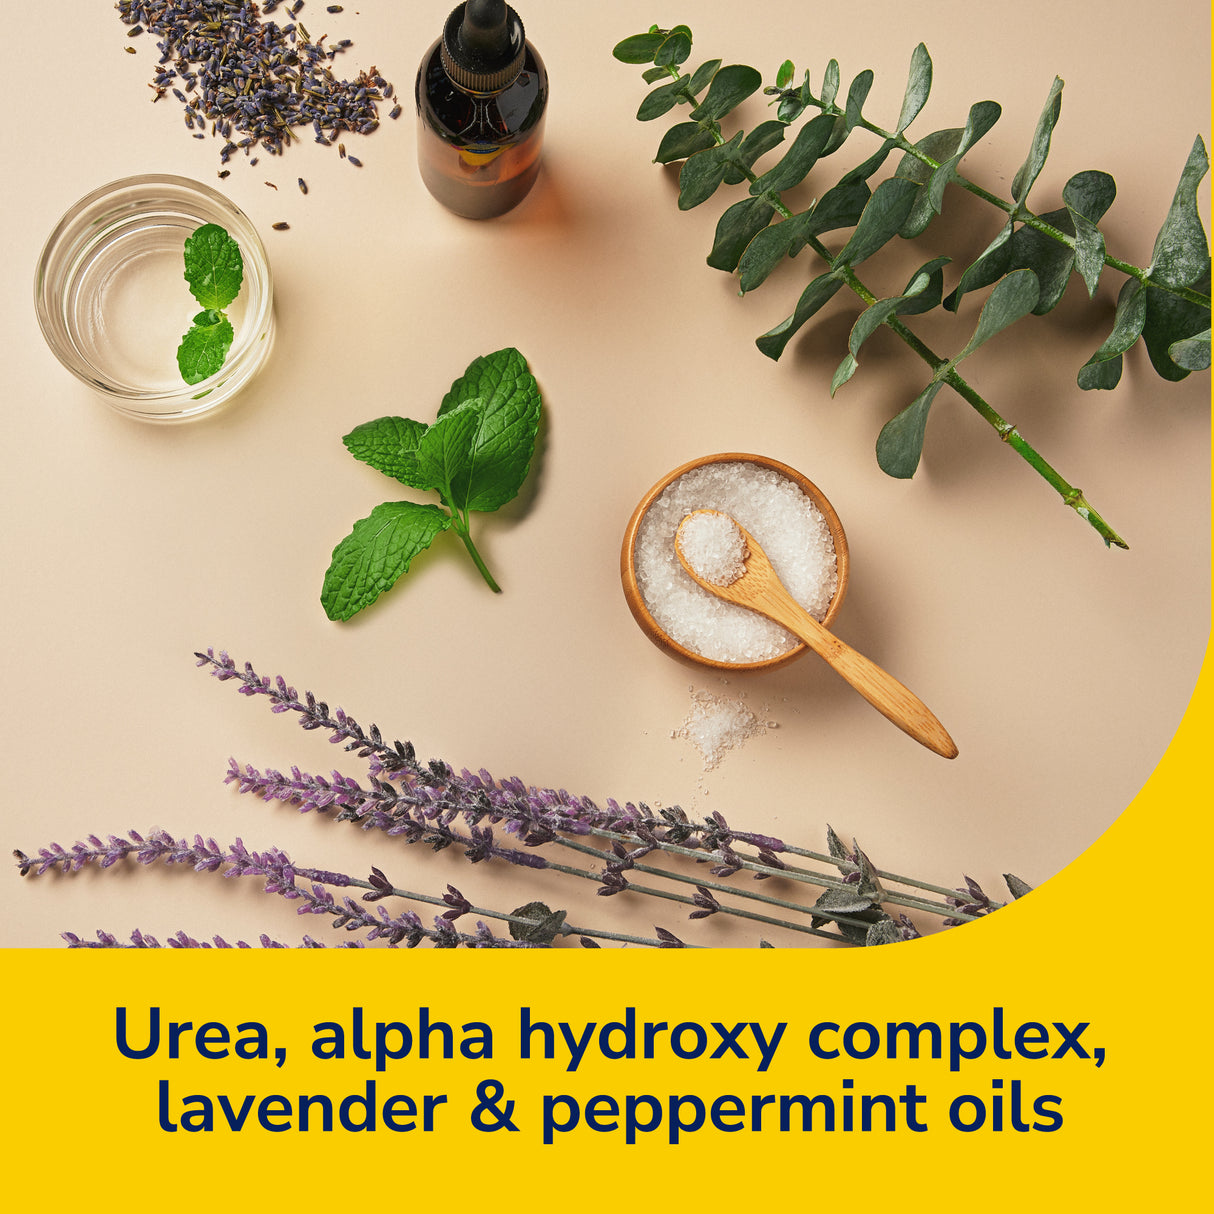 image of urea, alpha hydroxy complex, lavender and peppermint pils